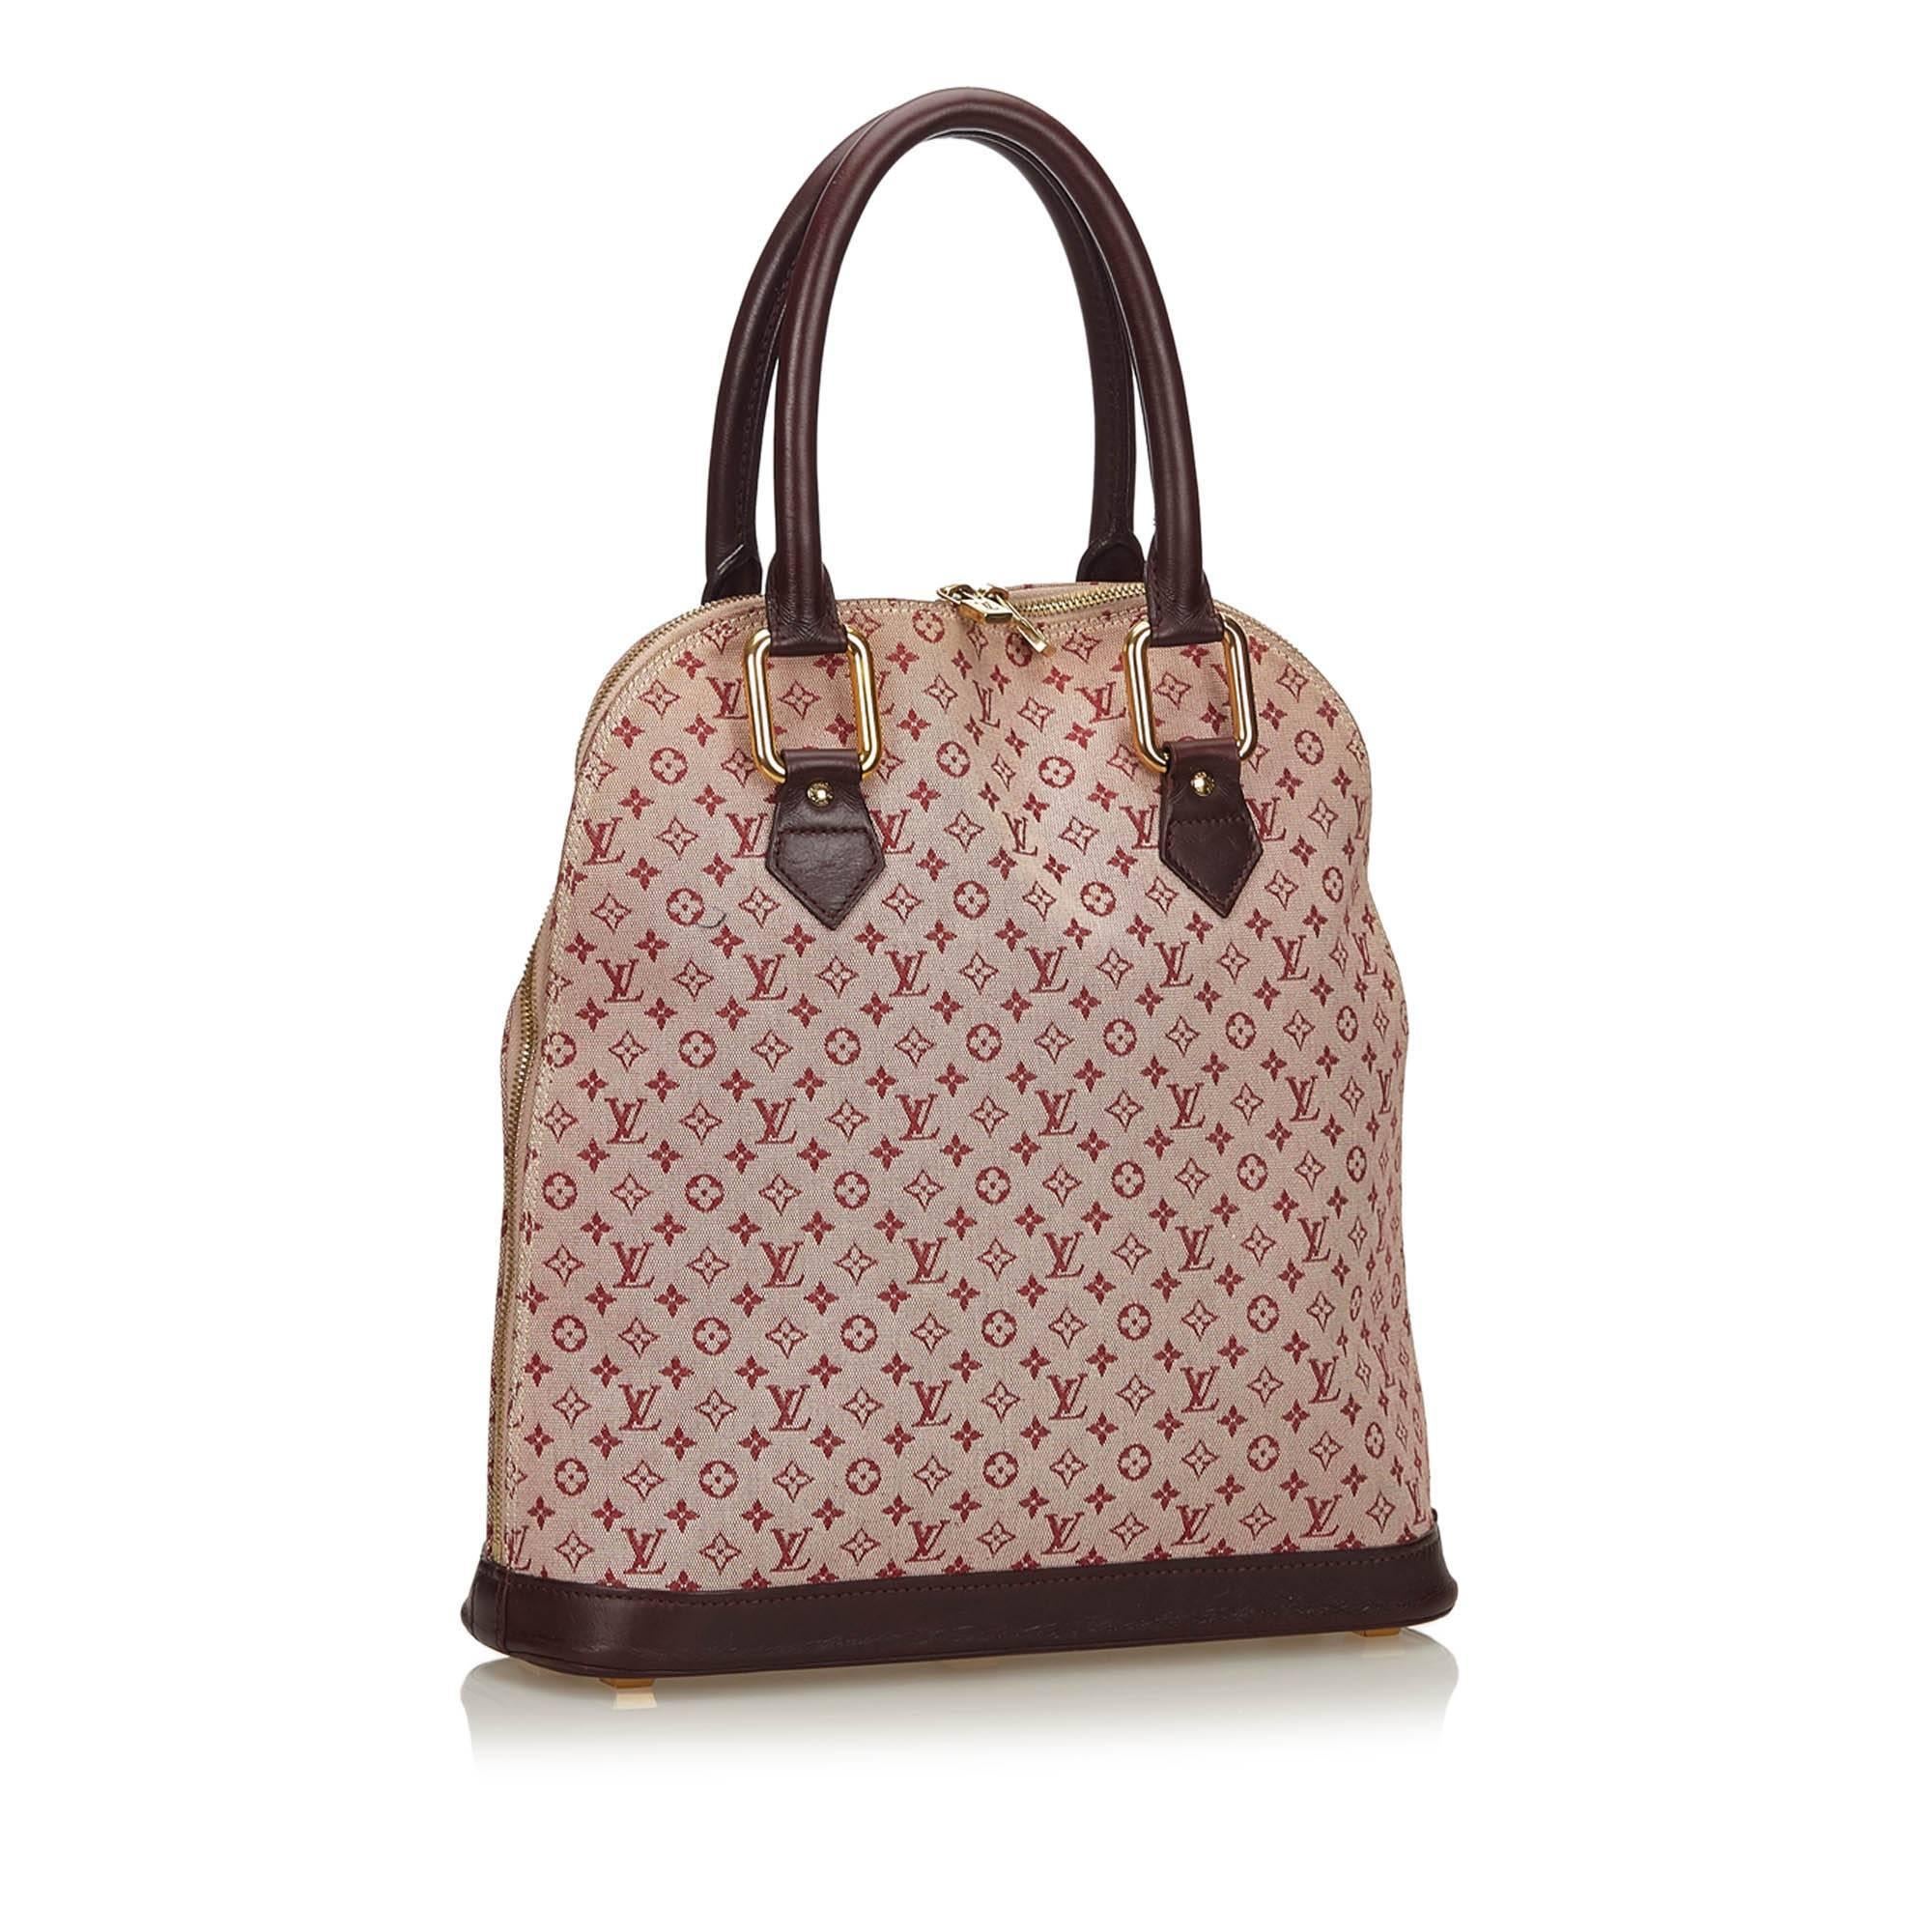 The Alma Haut features Mini Lin jacquard body, rolled leather handles, top zip closure, and interior zip and open pocket

It carries a B+ condition rating.

Dimensions: 
Length 33 cm
Width 32 cm
Depth 10 cm
Hand Drop 13 

Inclusions: Dust Bag,